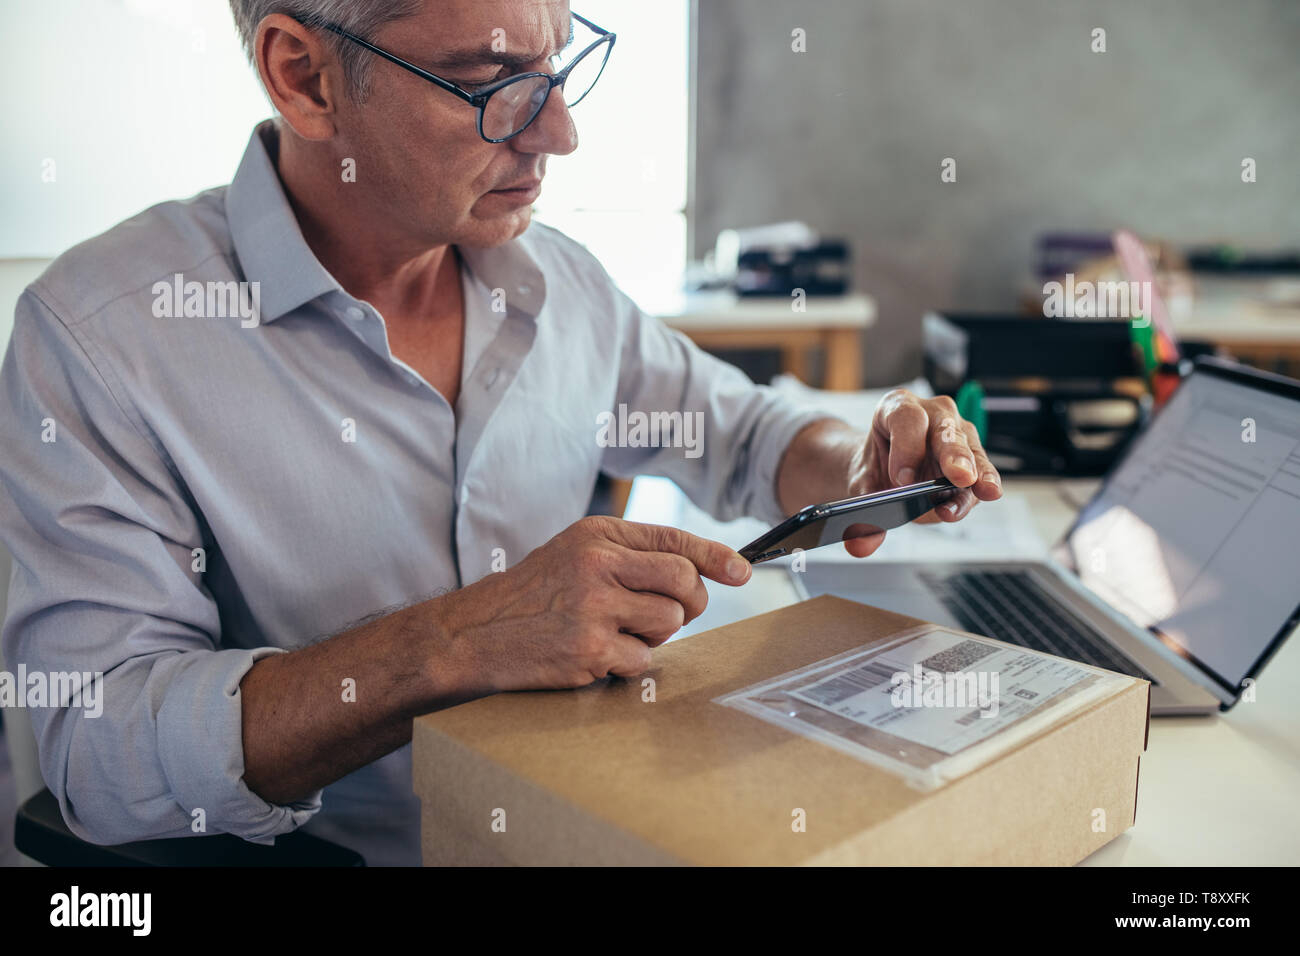 Mature businessman sitting at his desk and scanning a delivery box with his mobile phone. Man selling products online, scanning the barcode with his m Stock Photo